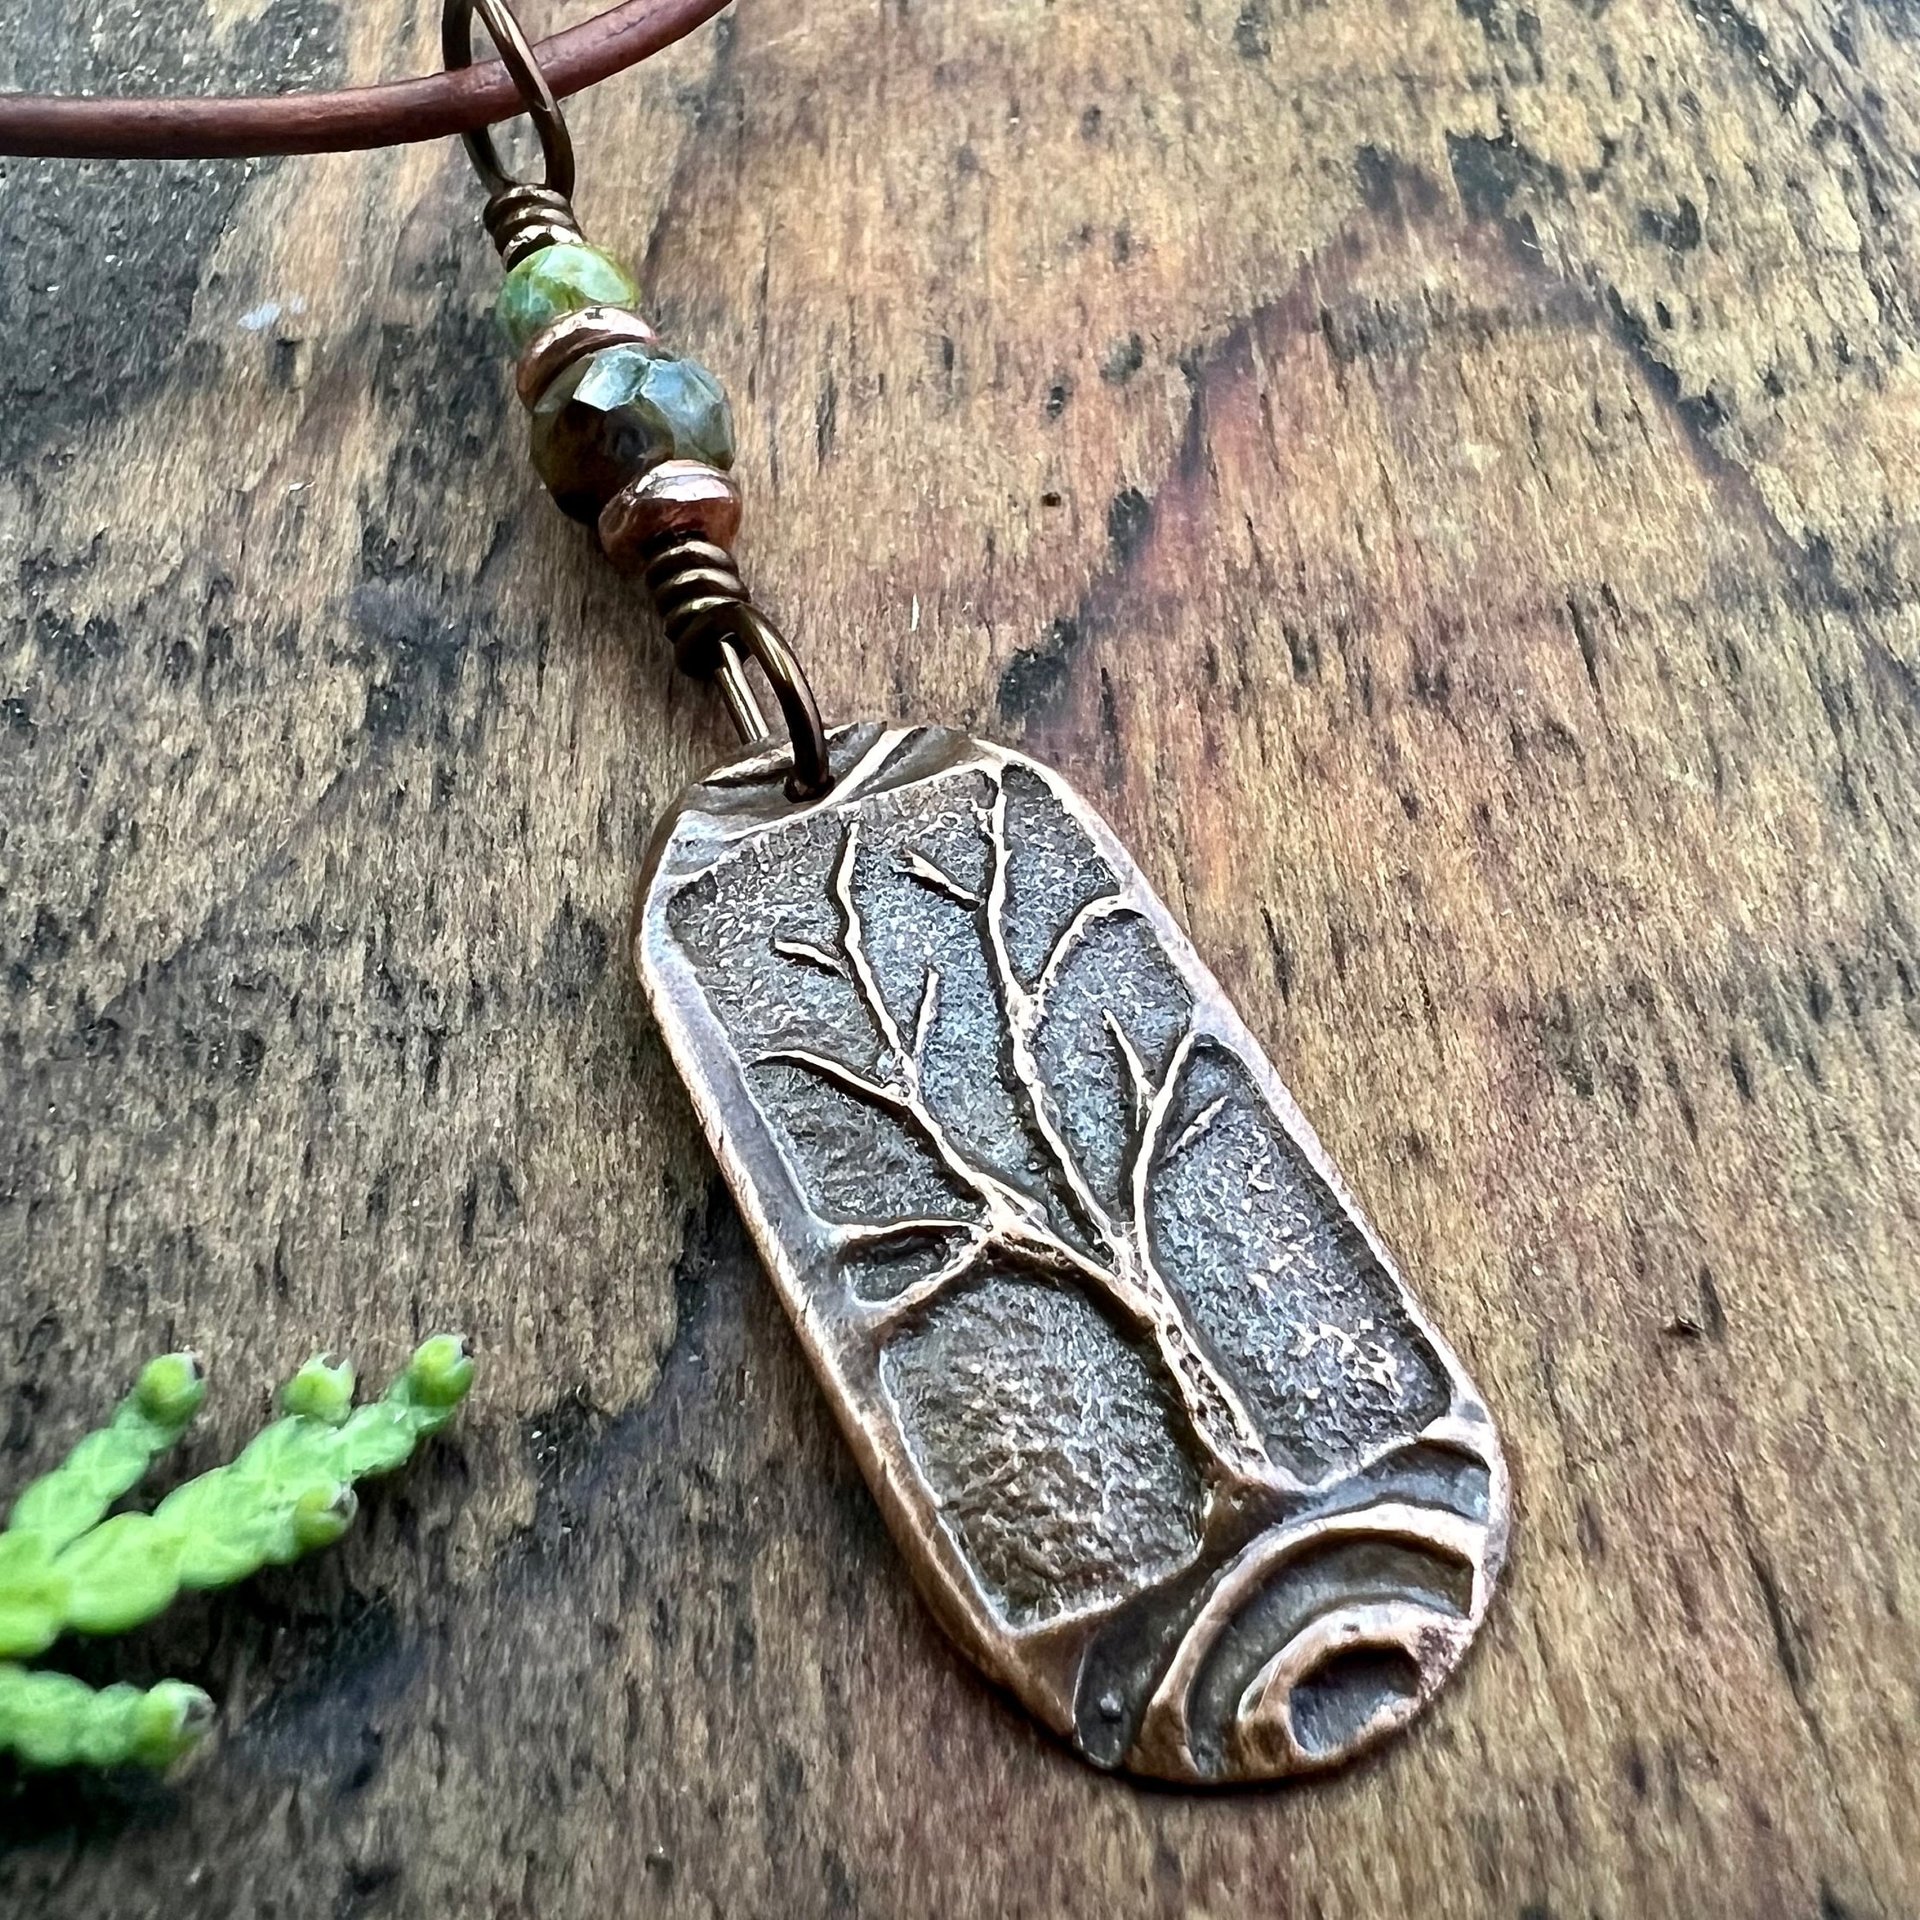 Copper Tree Pendant, Irish Celtic Spirals, One Tree, Czech Glass Beads, Leather & Vegan Cords, Earthy Rustic Jewelry, Tree Branches Roots